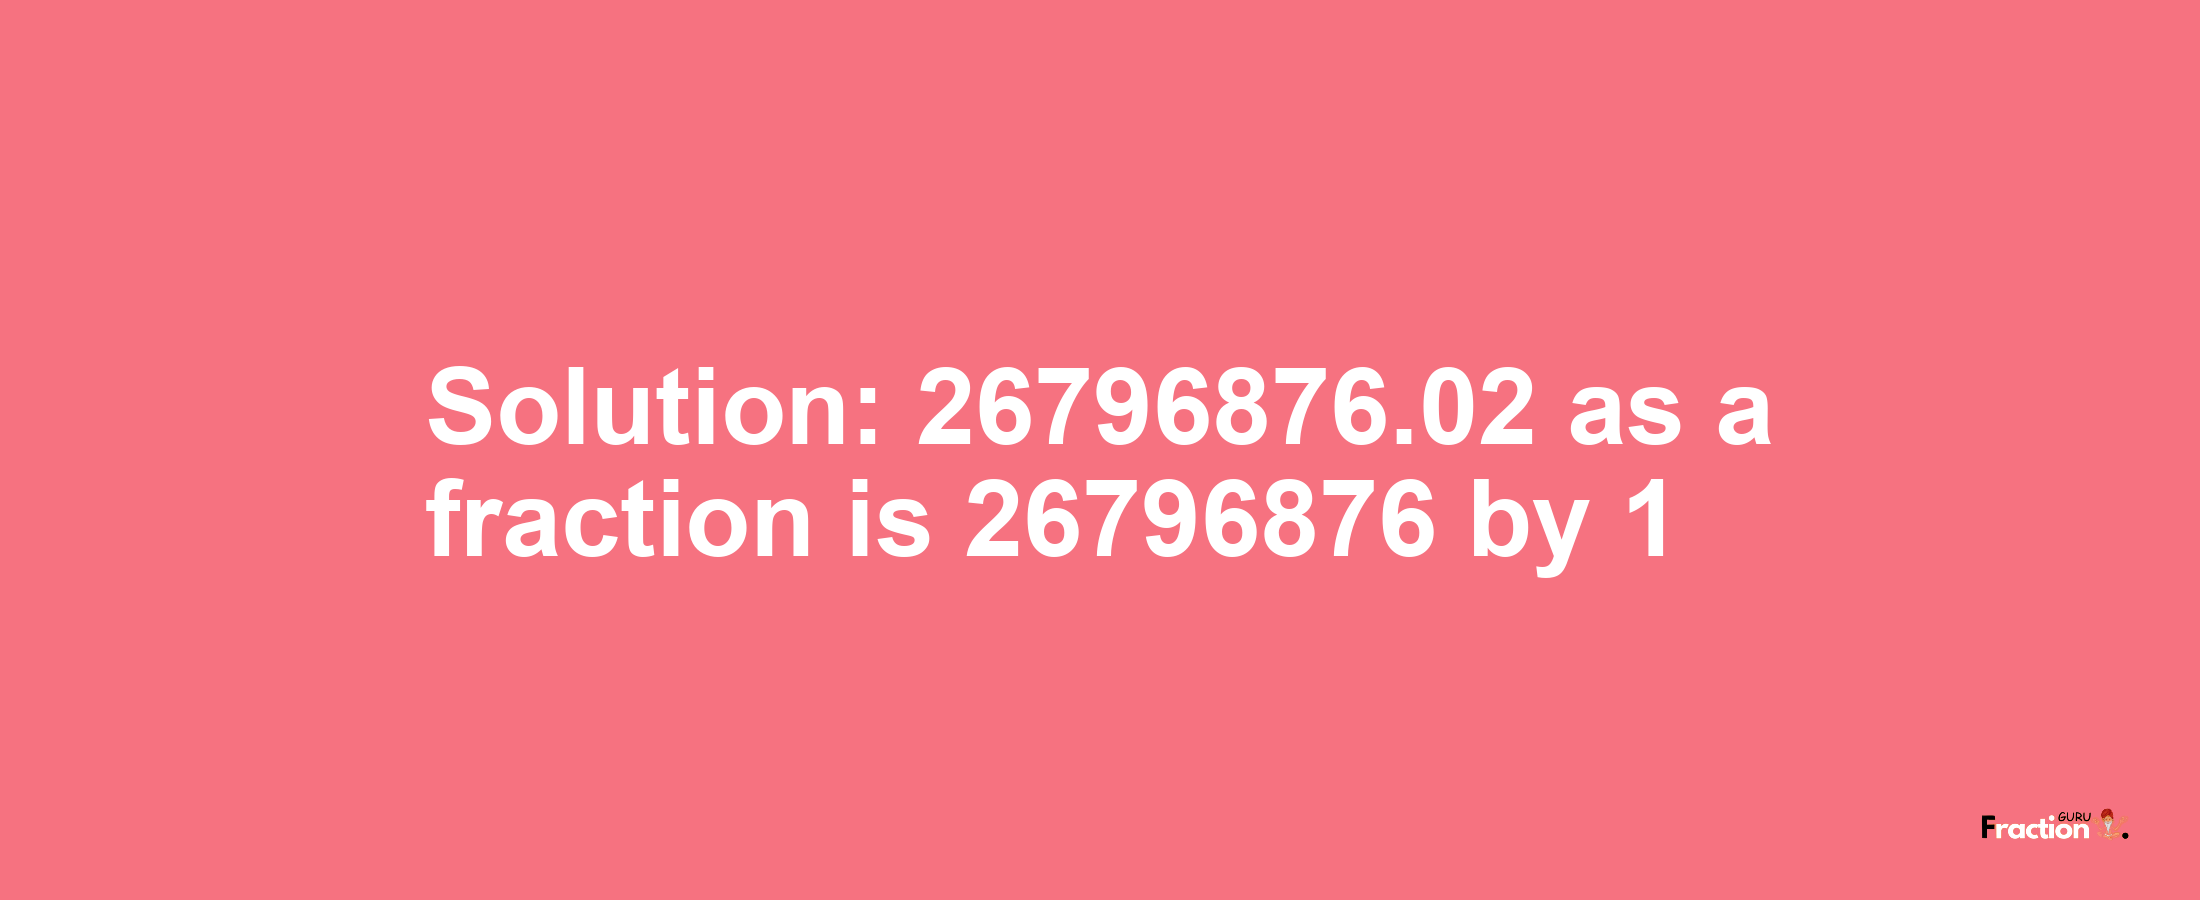 Solution:26796876.02 as a fraction is 26796876/1